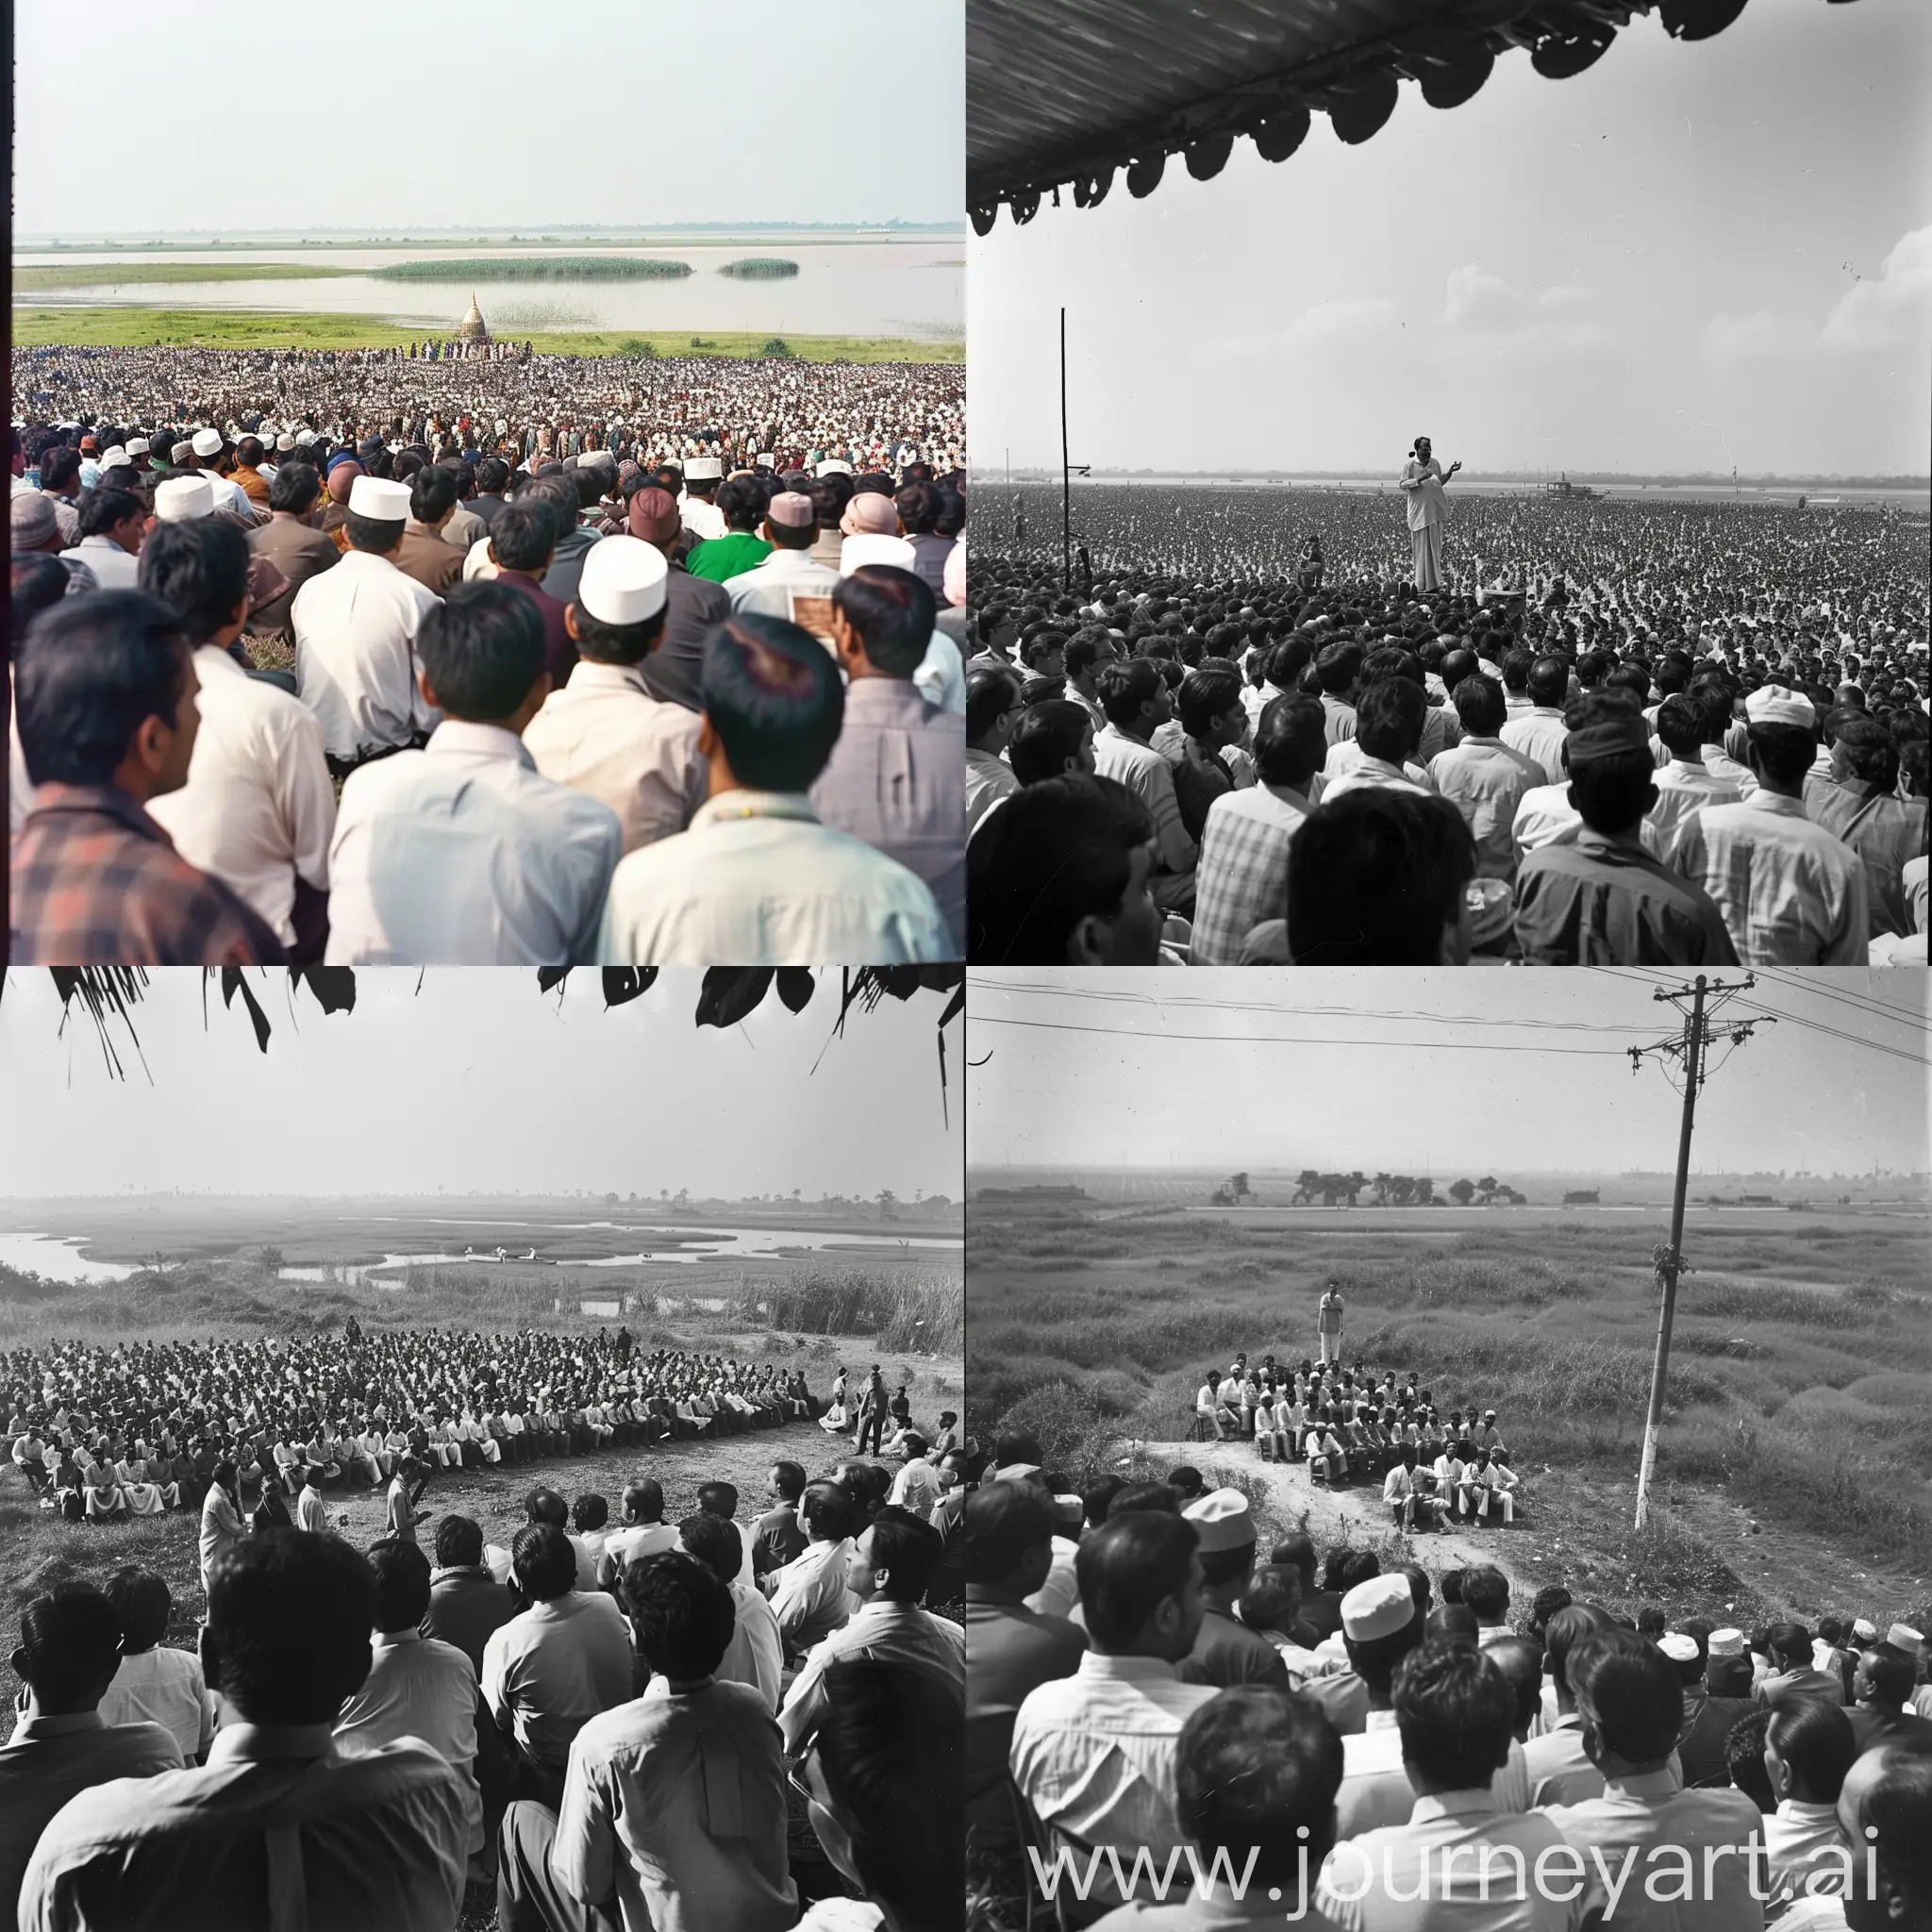 Bangladesh Sheikh Mujibur Rahman's important Historic speech on 7march in 1971, open field with historic crowod people listen his sologan